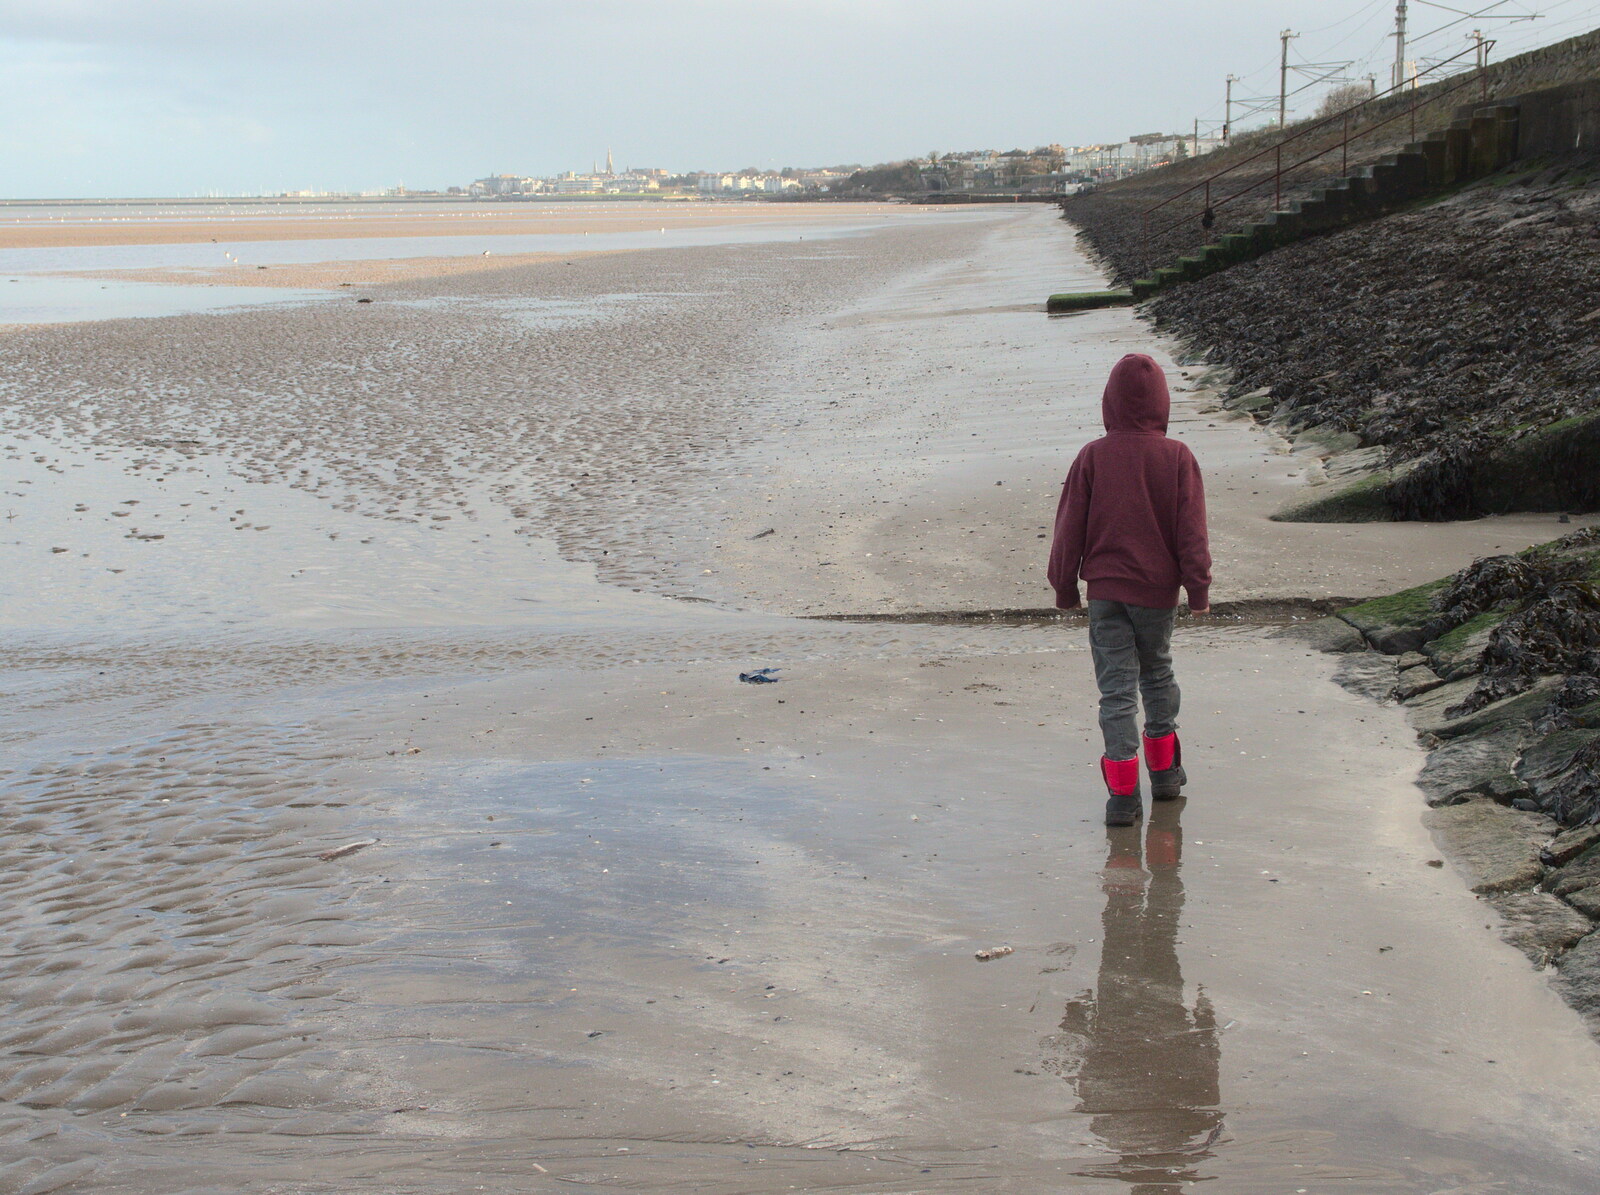 Fred wanders up the beach from Christmas Eve in Dublin and Blackrock, Ireland - 24th December 2015